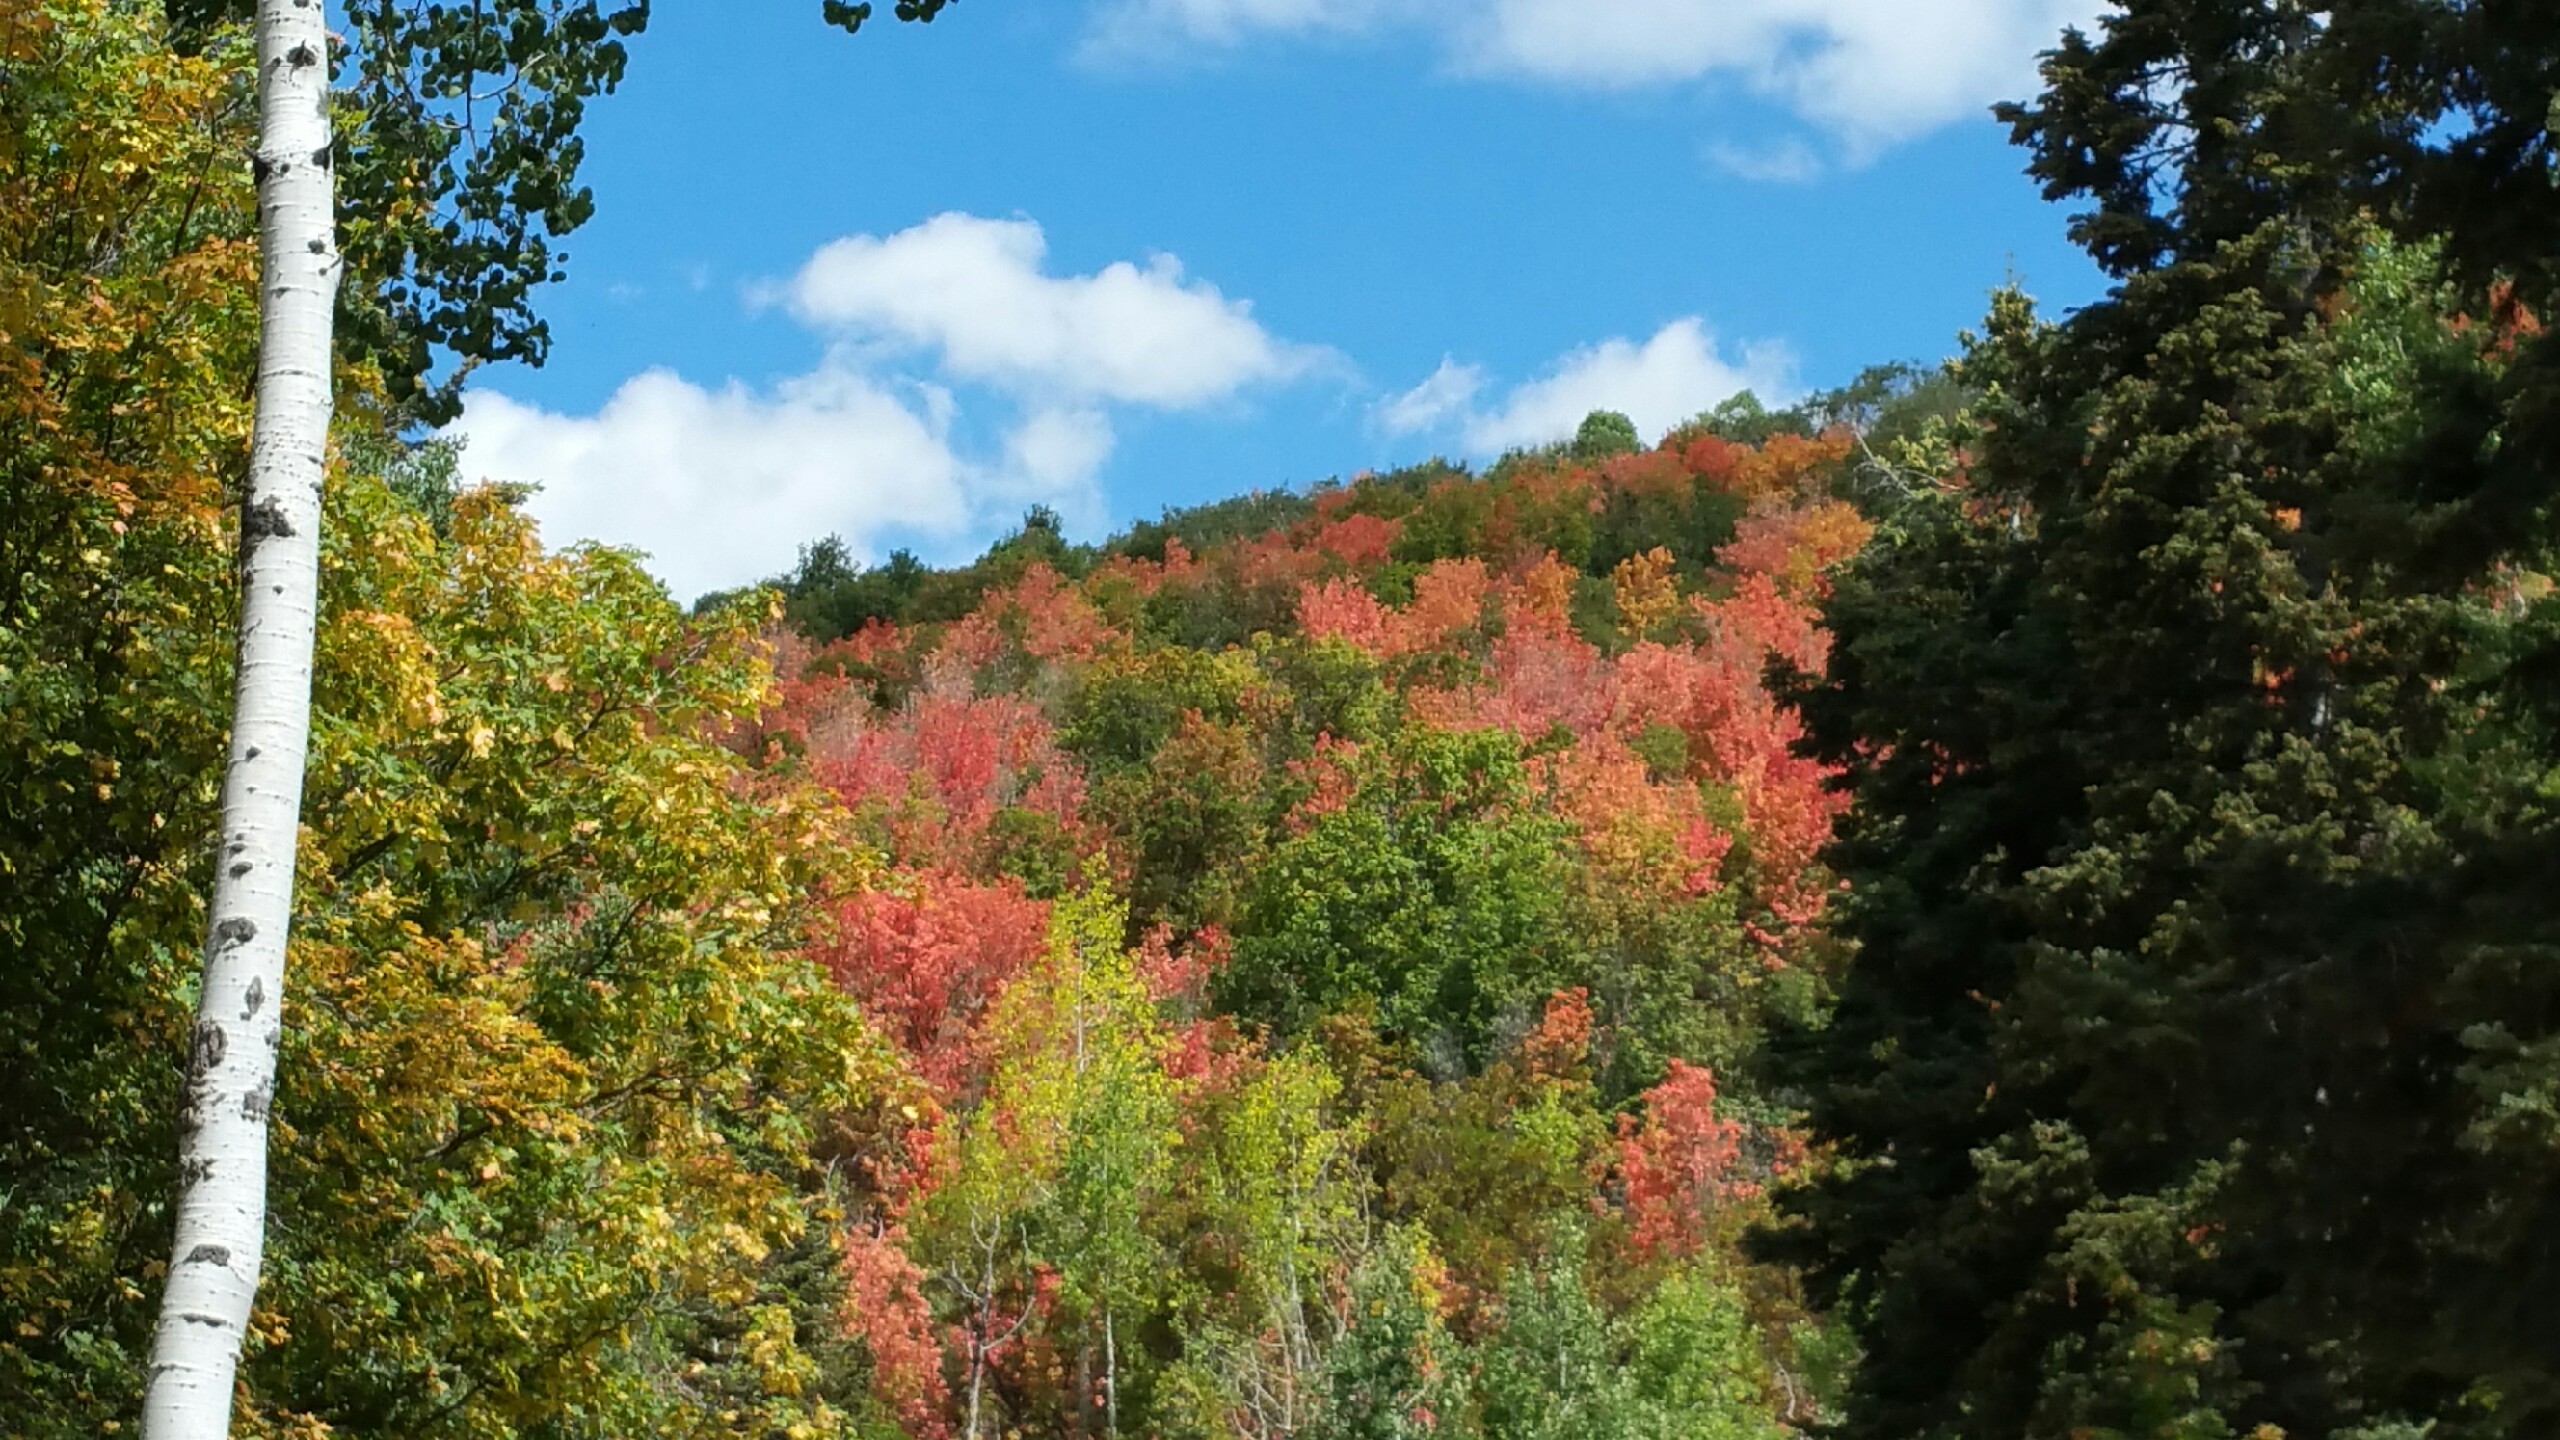 The fall colors have exploded on the mountain!